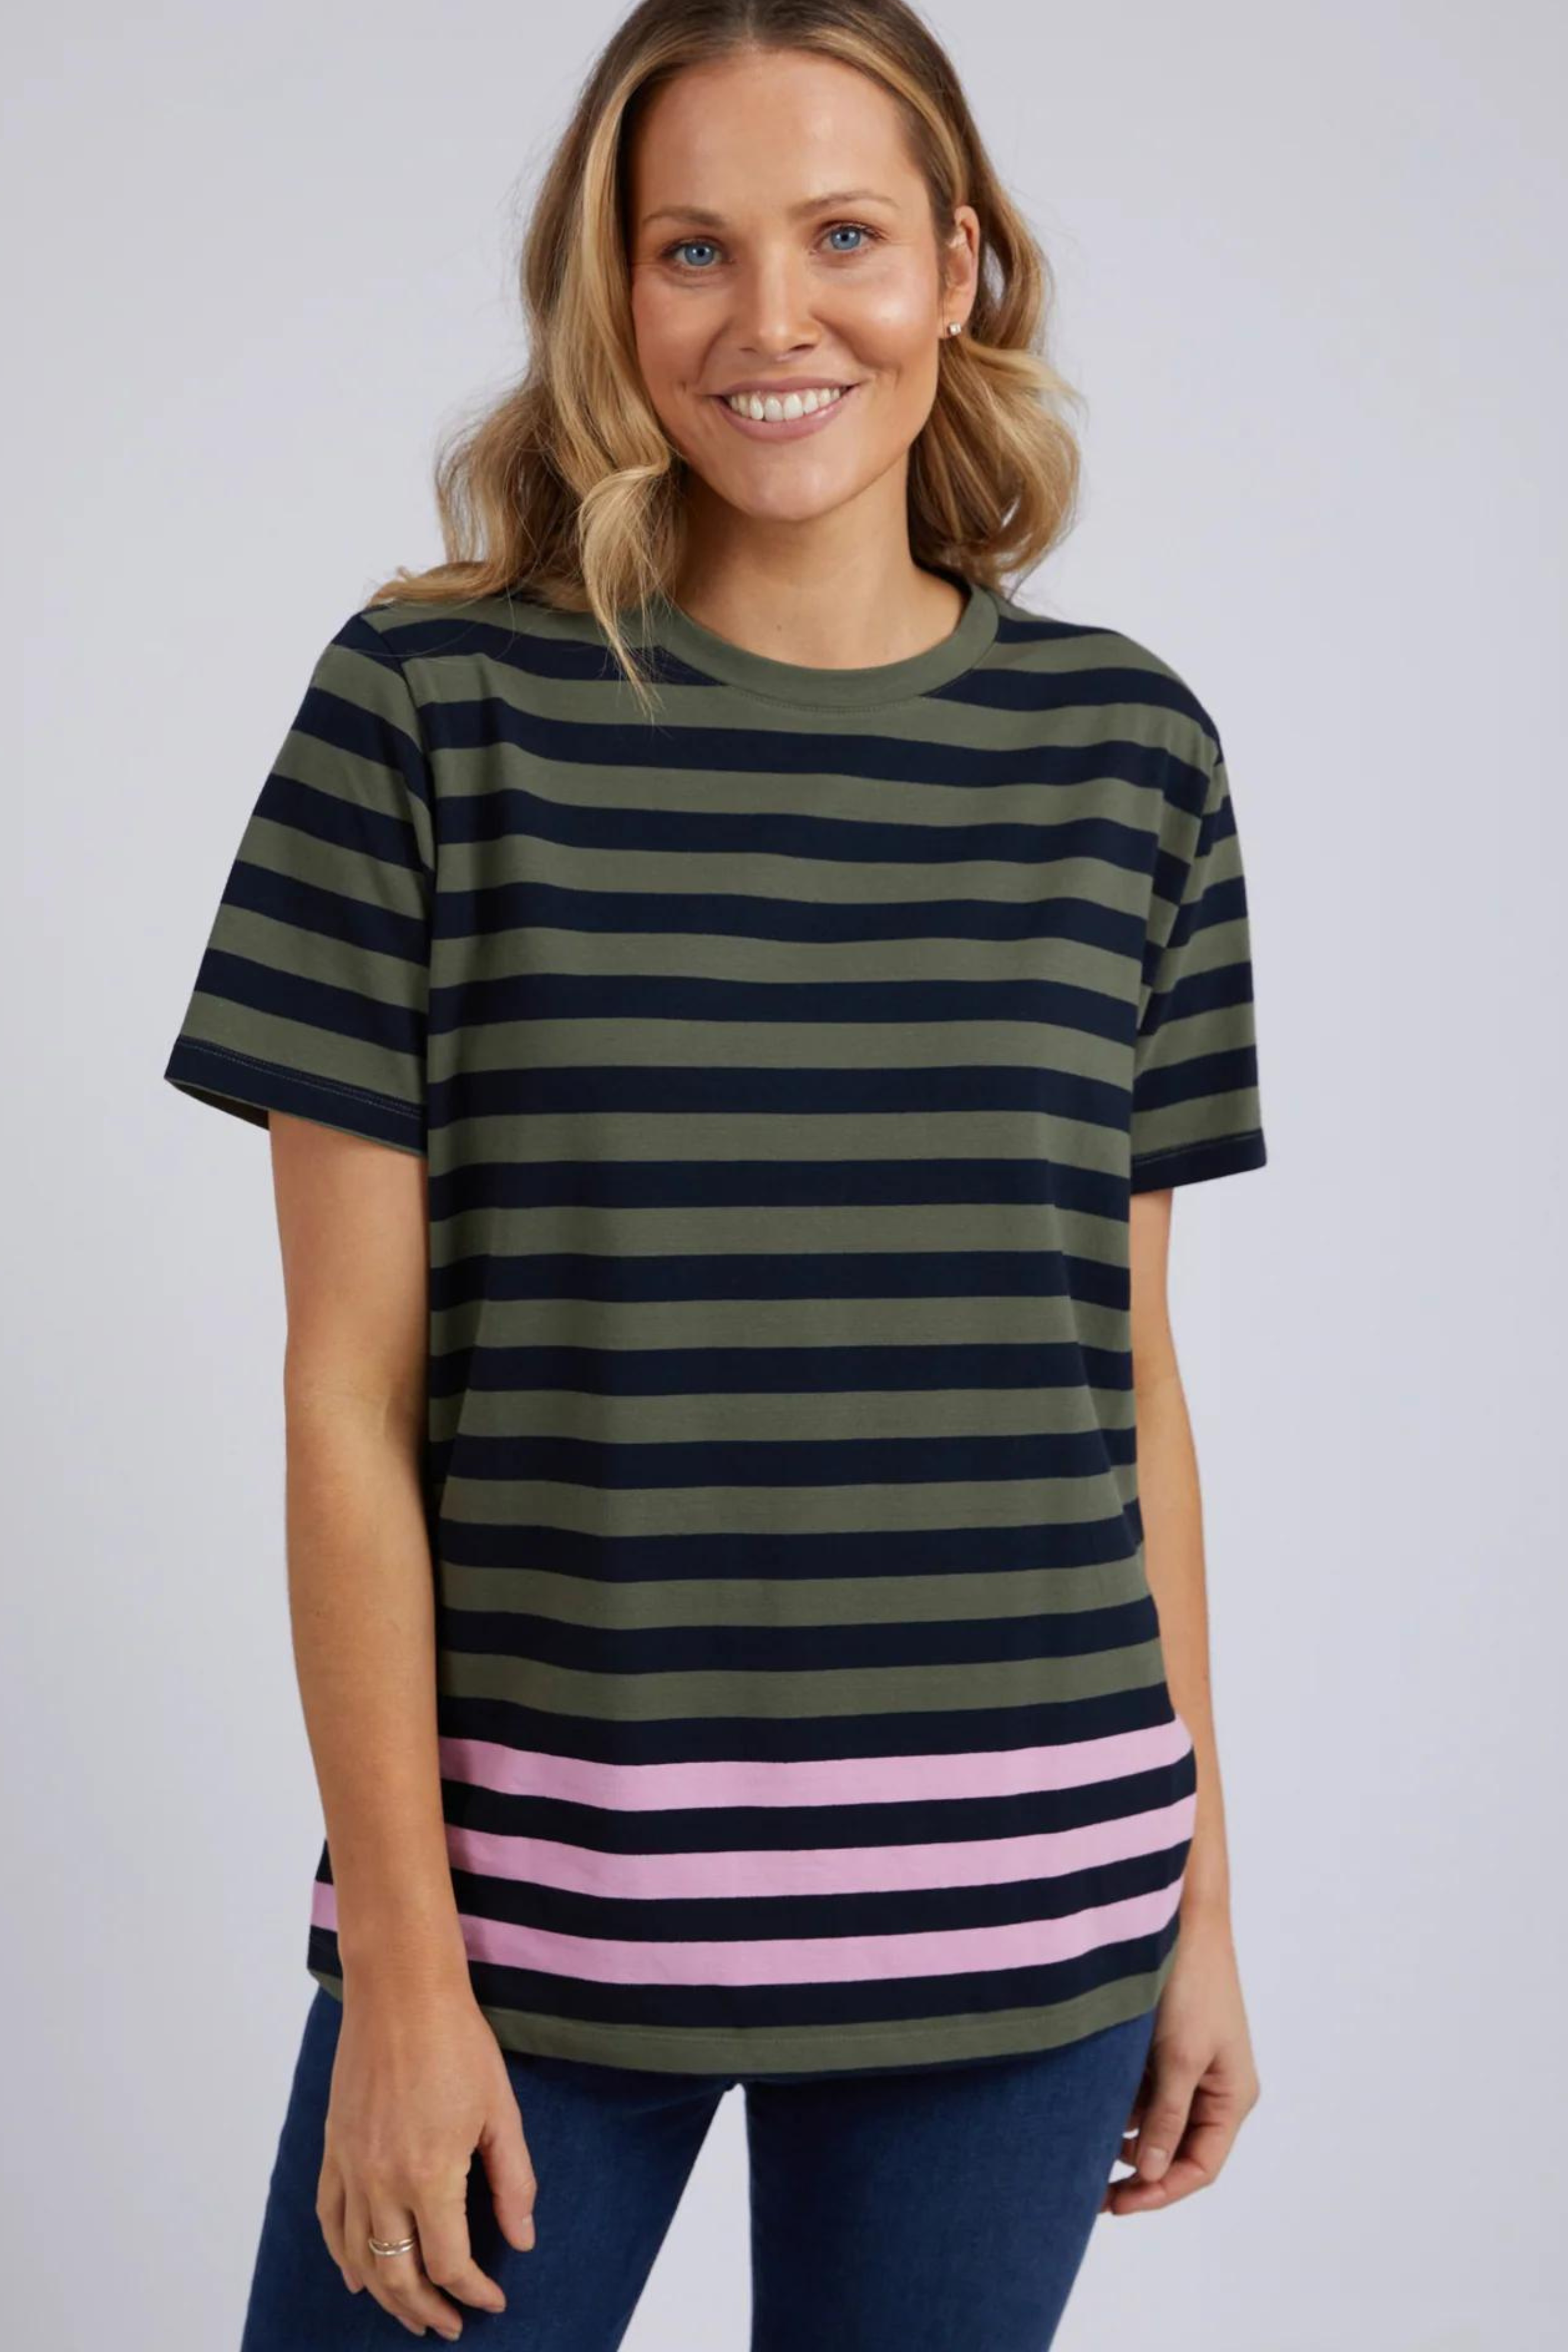 CLOVER TEE in Khaki and Navy Stripe